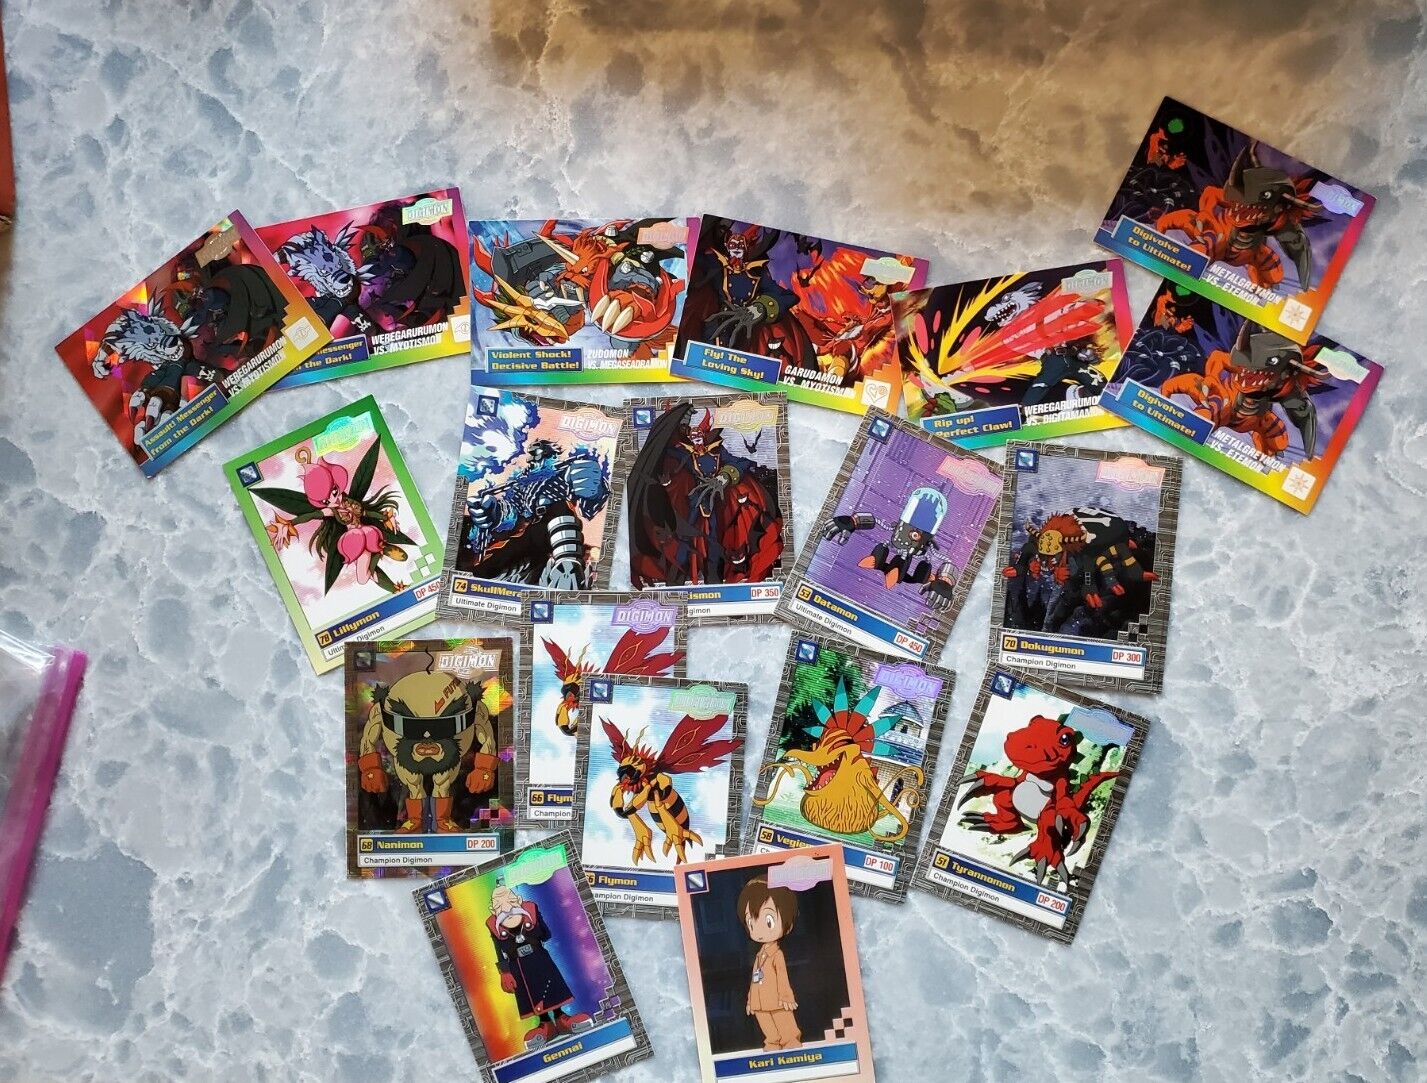 Digimon 2000 Upper Deck Animated Series Cards - 21 Cards Total